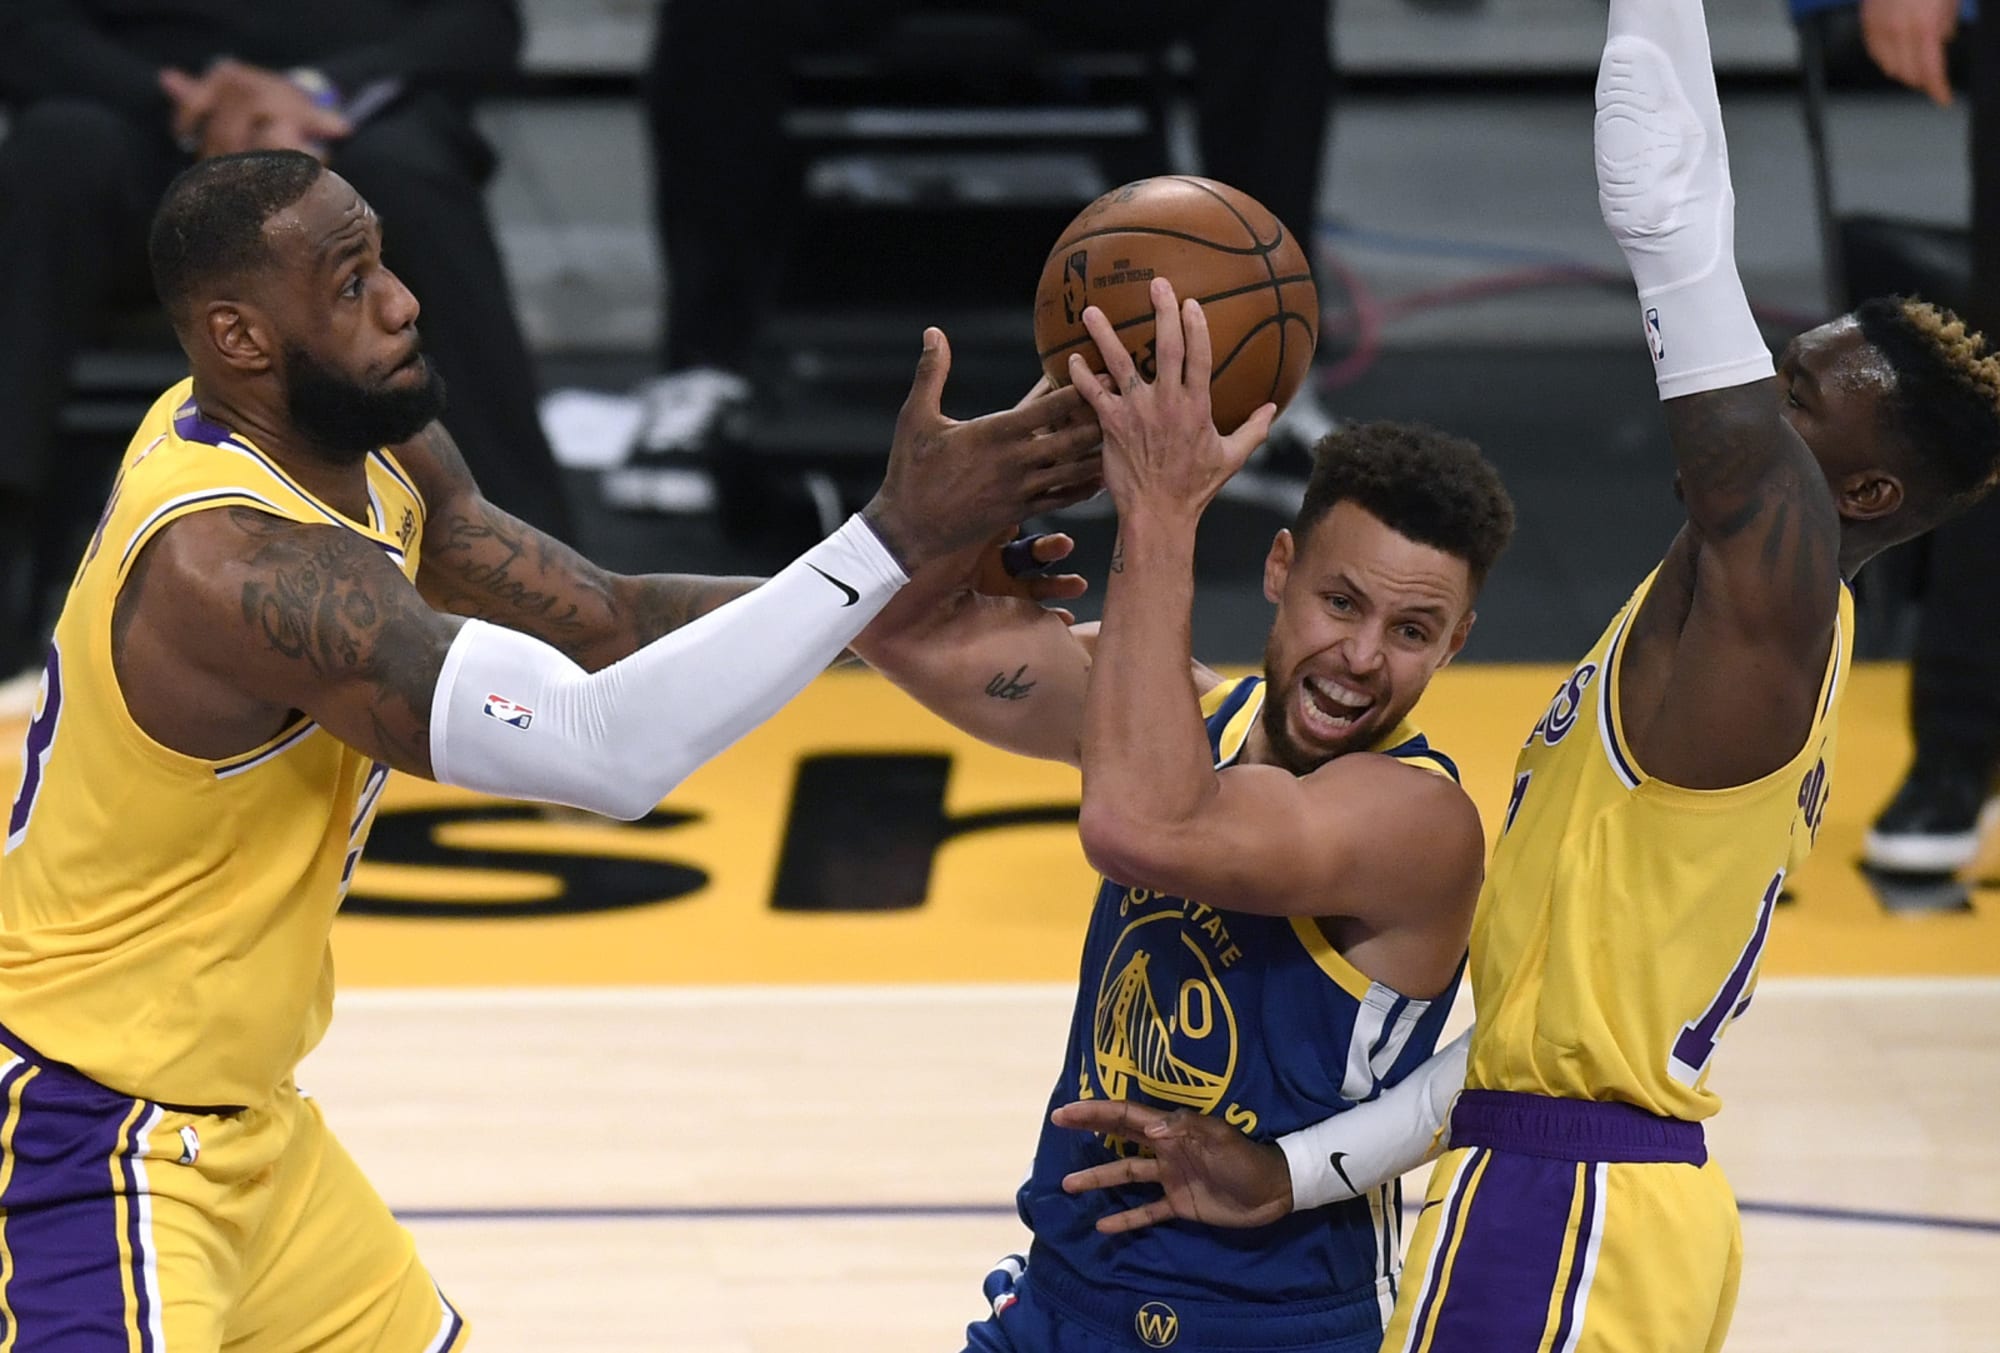 Lakers vs. Warriors: How to watch the NBA play-in tournament